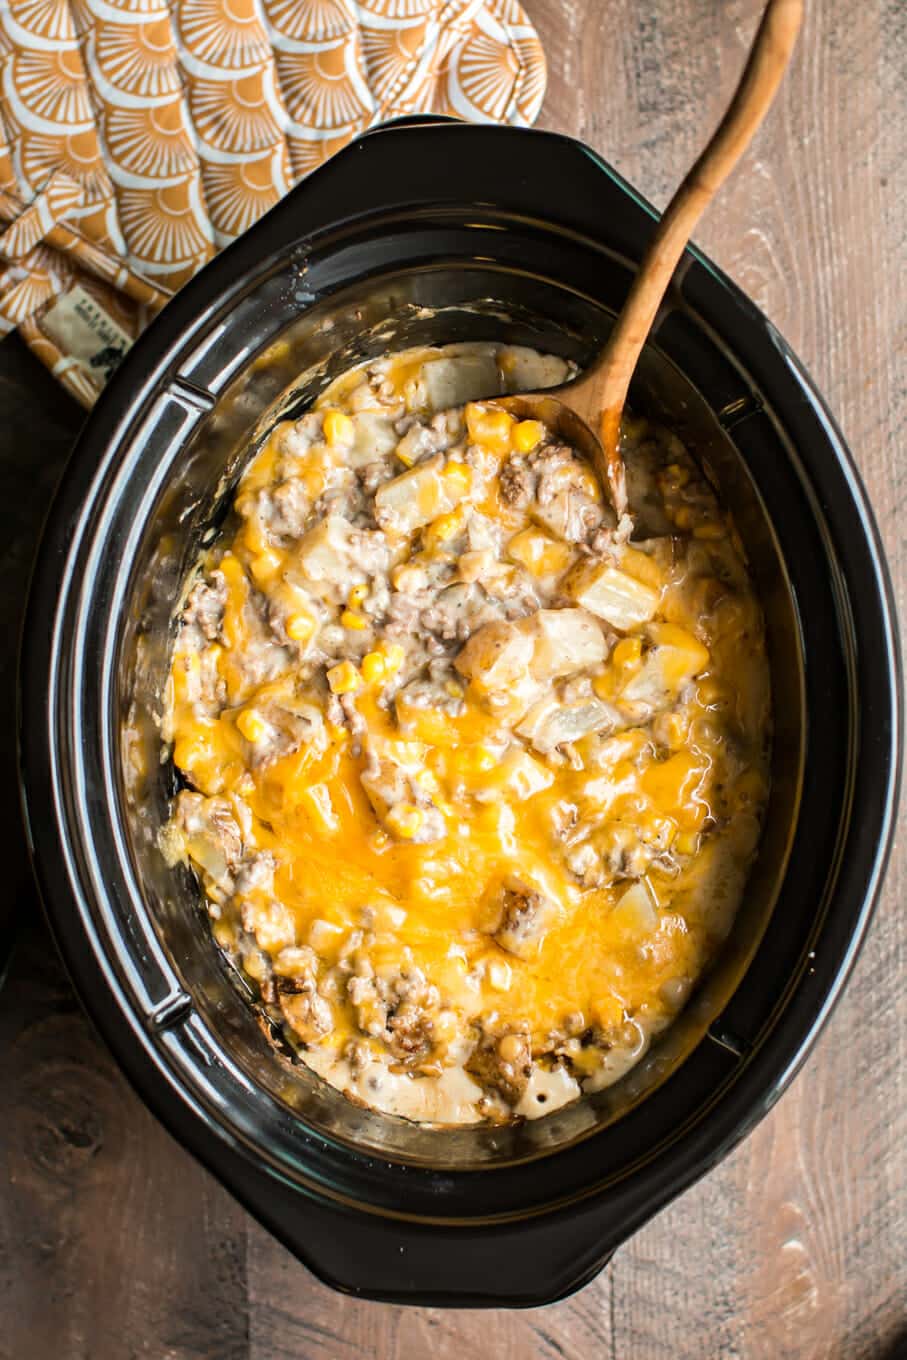 diced potatoes, corn and cream of mushroom soup cooked with cheese on top in slow cooker.